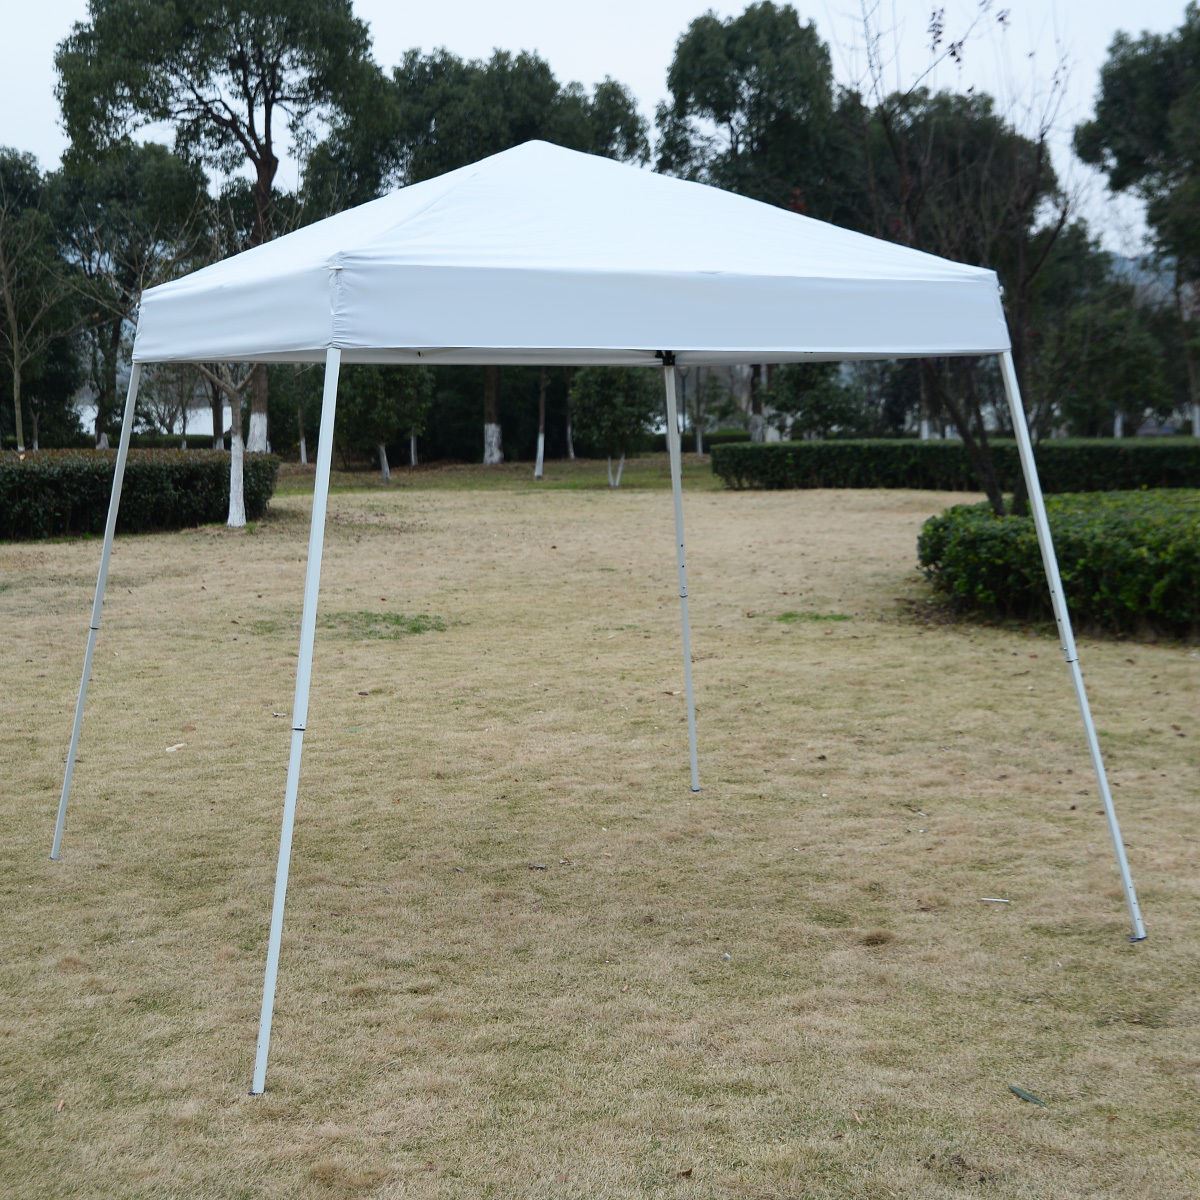 Cb19143 8 X 8 Ft. Outdoor Ez Pop Up Tent Gazebo With Carry Bag - White